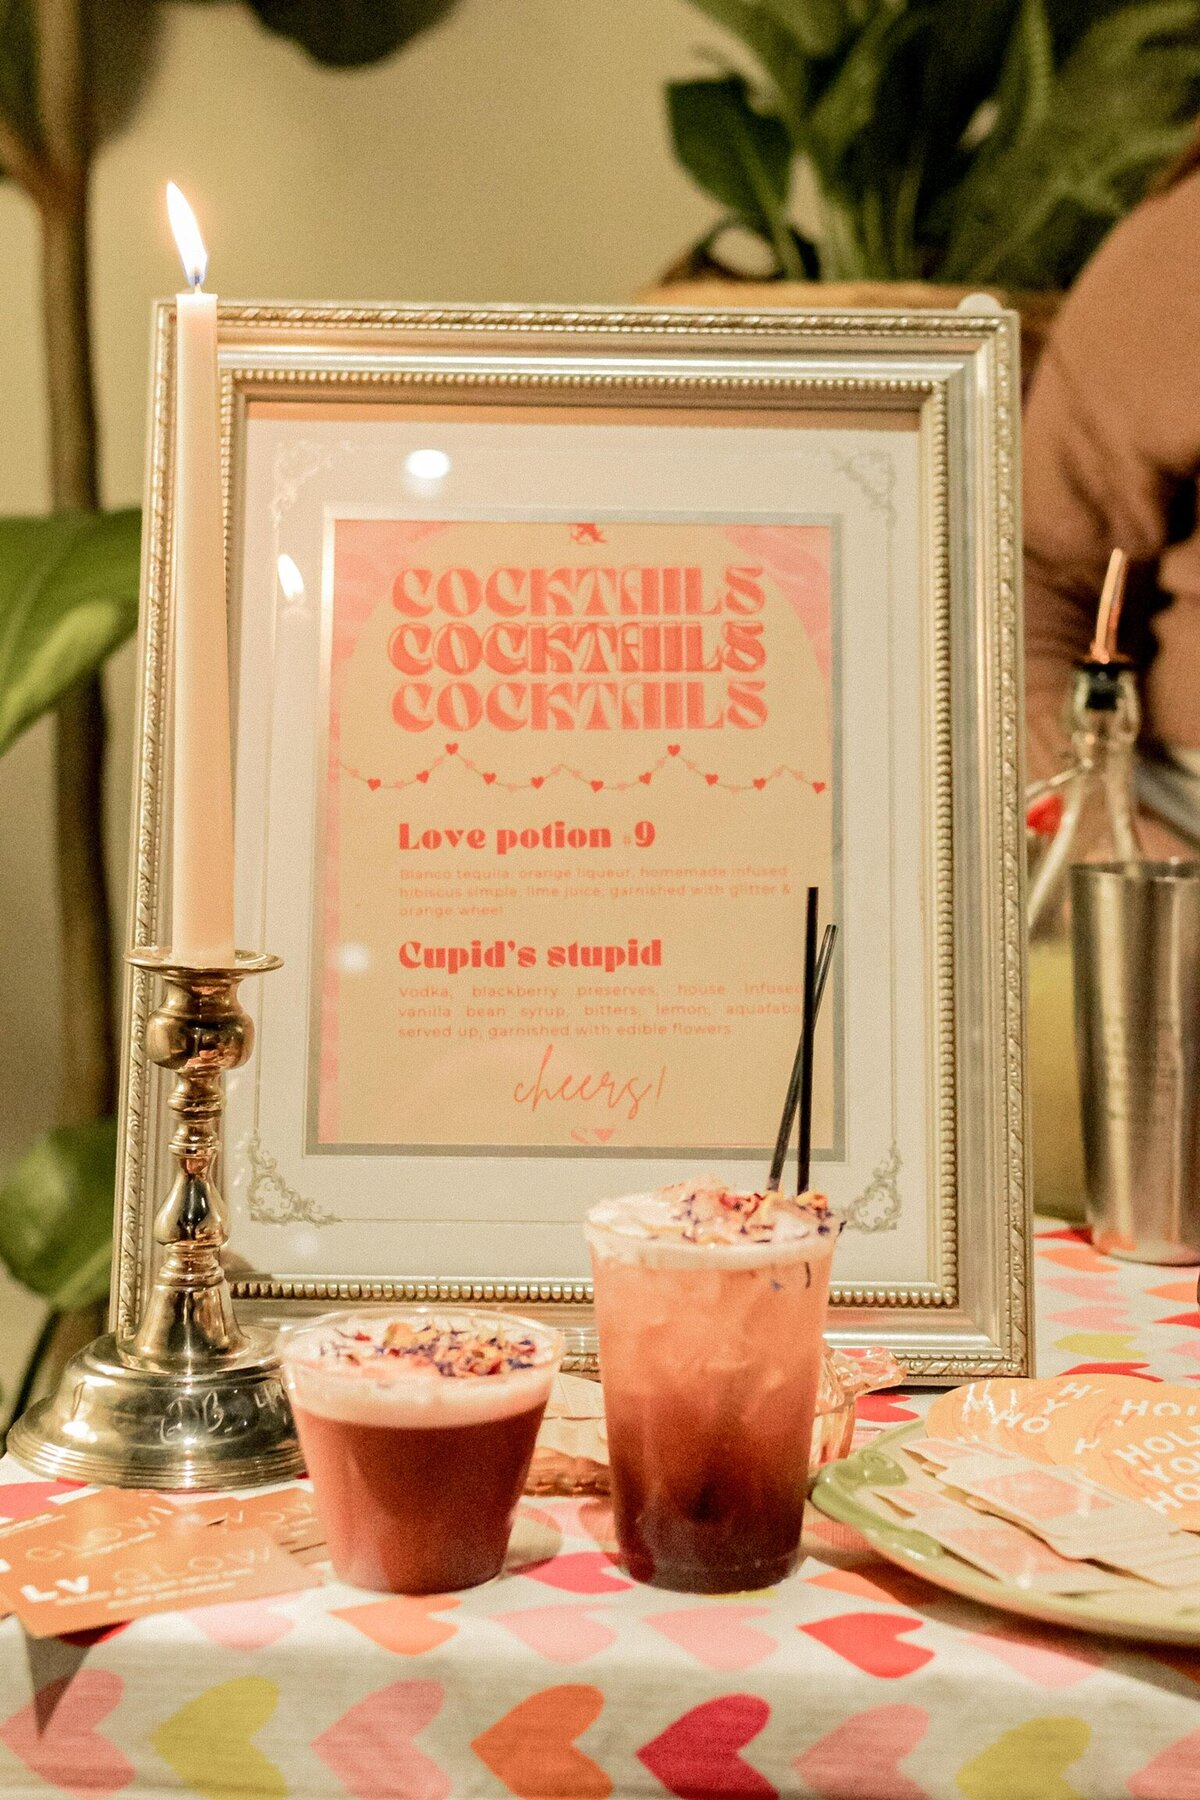 Cocktail menu at event with two cocktails in front of it